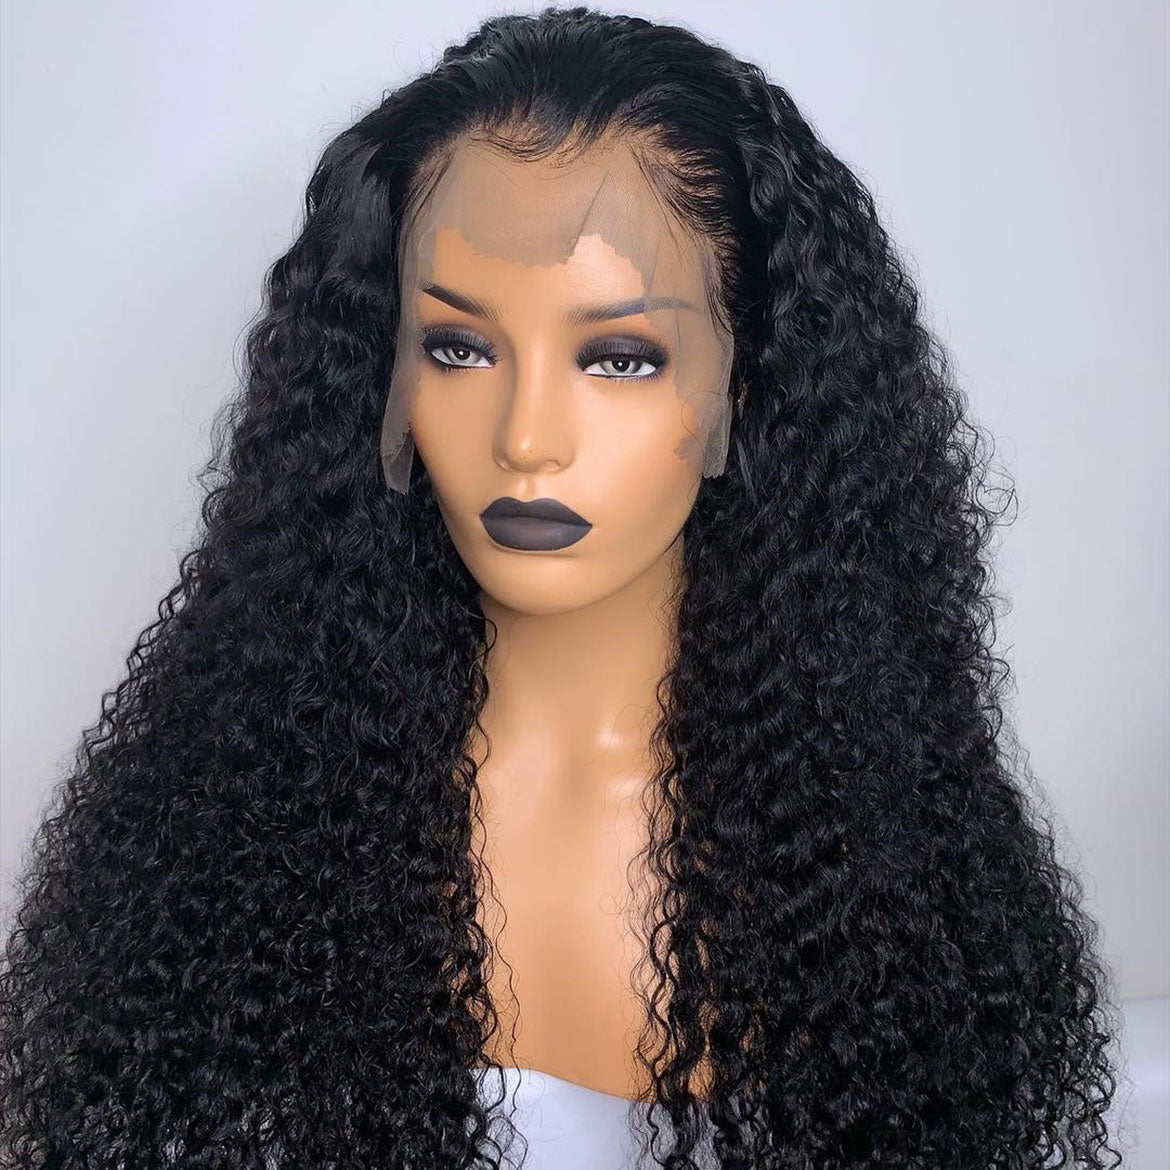 VRBest Affordable Curly Human Hair Wigs